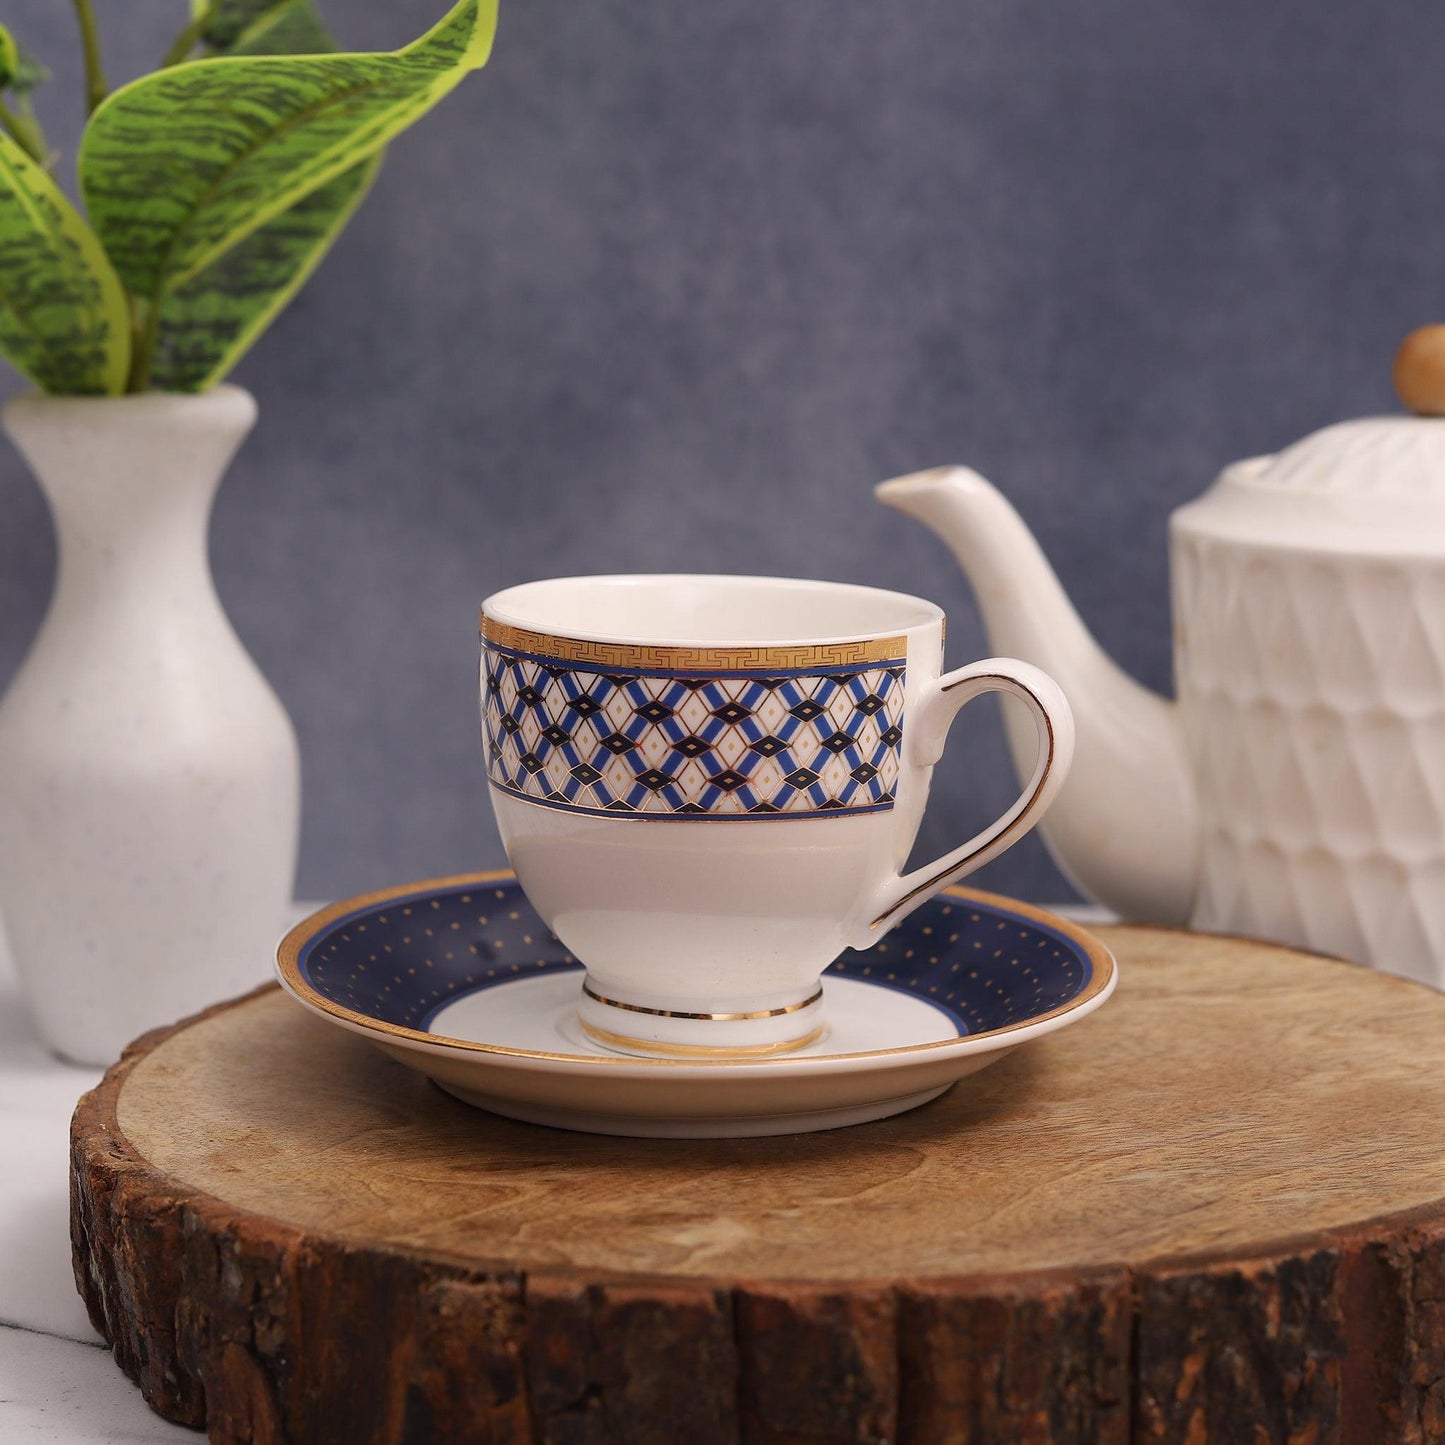 Combi of rectangle and rombus on cup and polka dots on saucer (Set of 6 Cups and 6 Saucers) - Amora Crockery